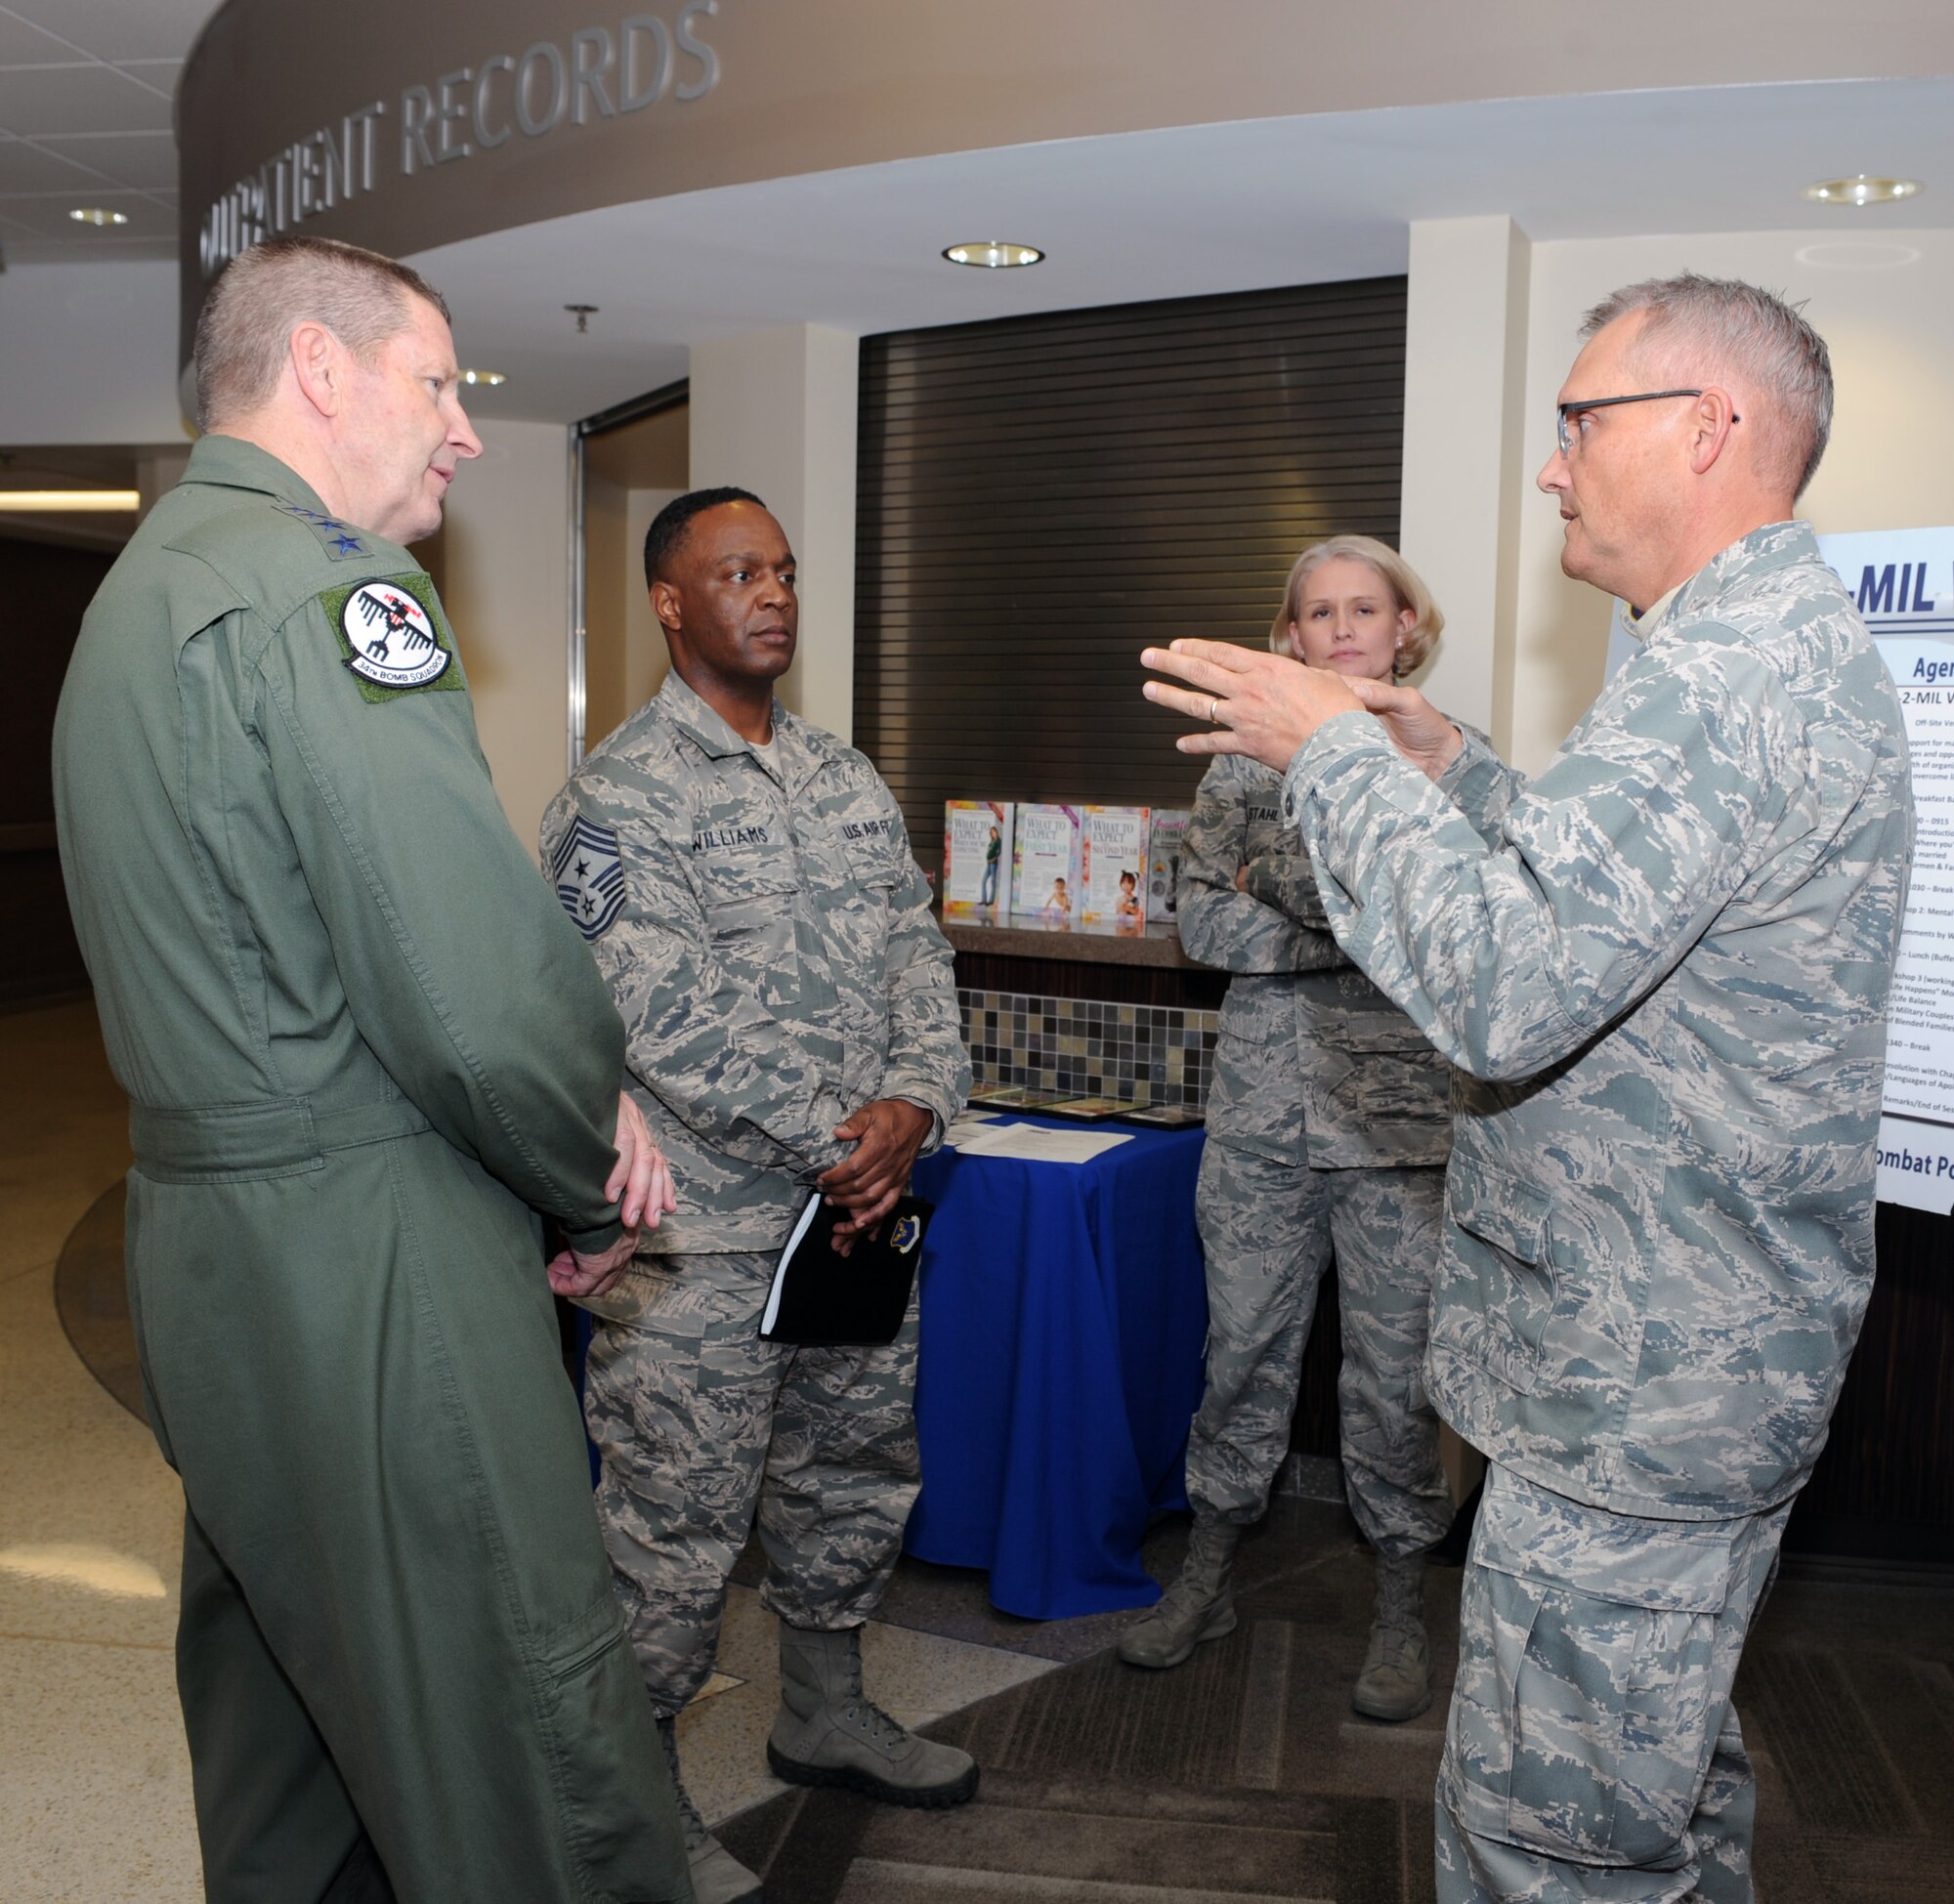 Gen. Robin Rand, AFGSC commander, and Chief Master Sgt. Calvin Williams, AFGSC command chief, learn about the “Mil-to-Mil” program from Chap. (Maj.) David Knight, 28th Bomb Wing chaplain, at Ellsworth AFB, S.D., April 28, 2016. The chapel hosts seminars and retreats for couples, allowing them to take time to focus on fortifying their relationships surrounded by fellow mil-to-mil couples. (Air Force photo by Airman 1st Class Denise M. Nevins)